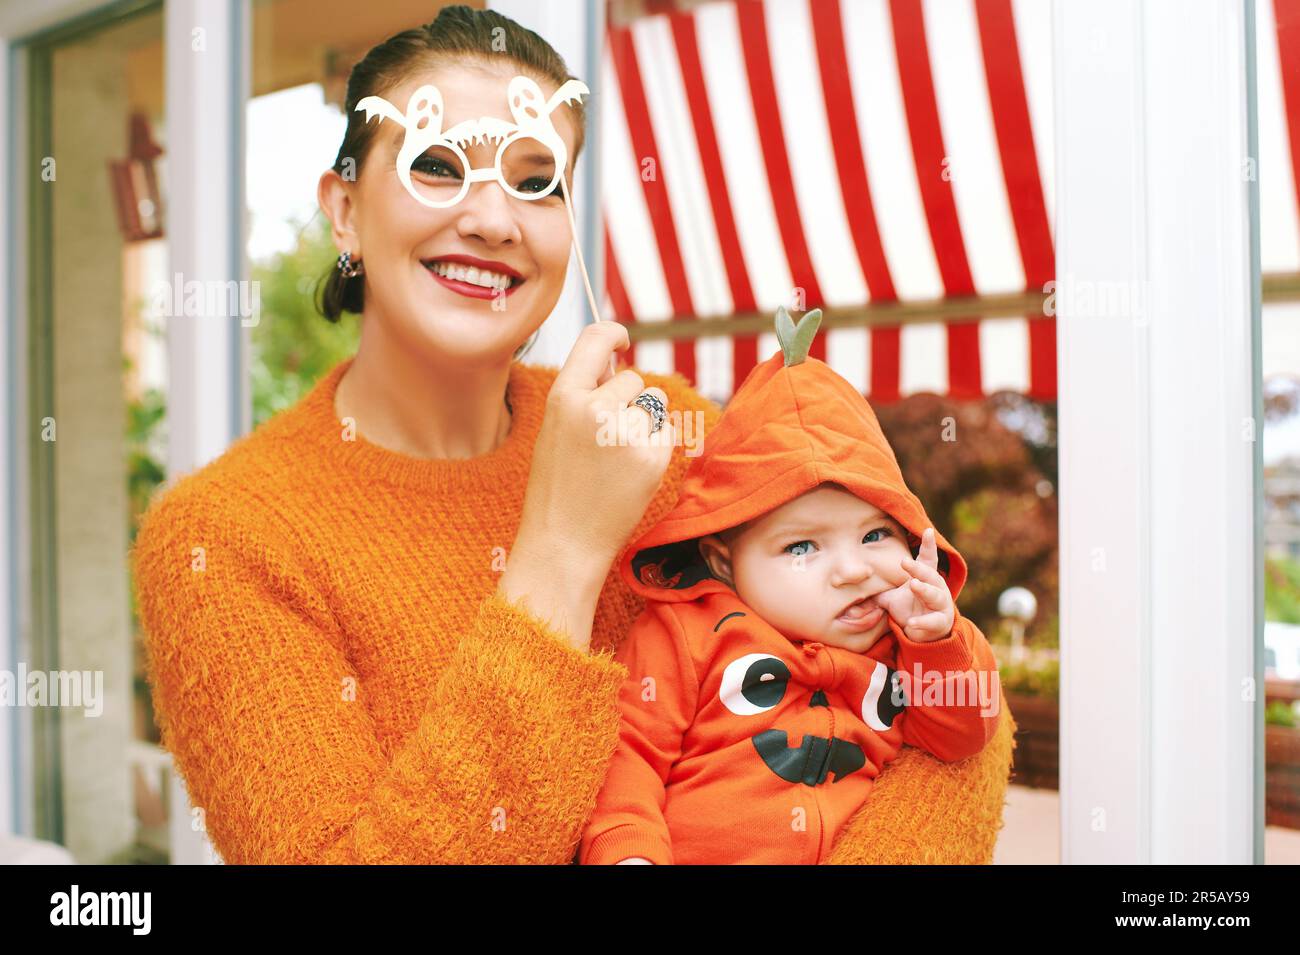 Halloween party with baby, mother holding child wearing pumpkin costume, posing with ghost paper glasses Stock Photo